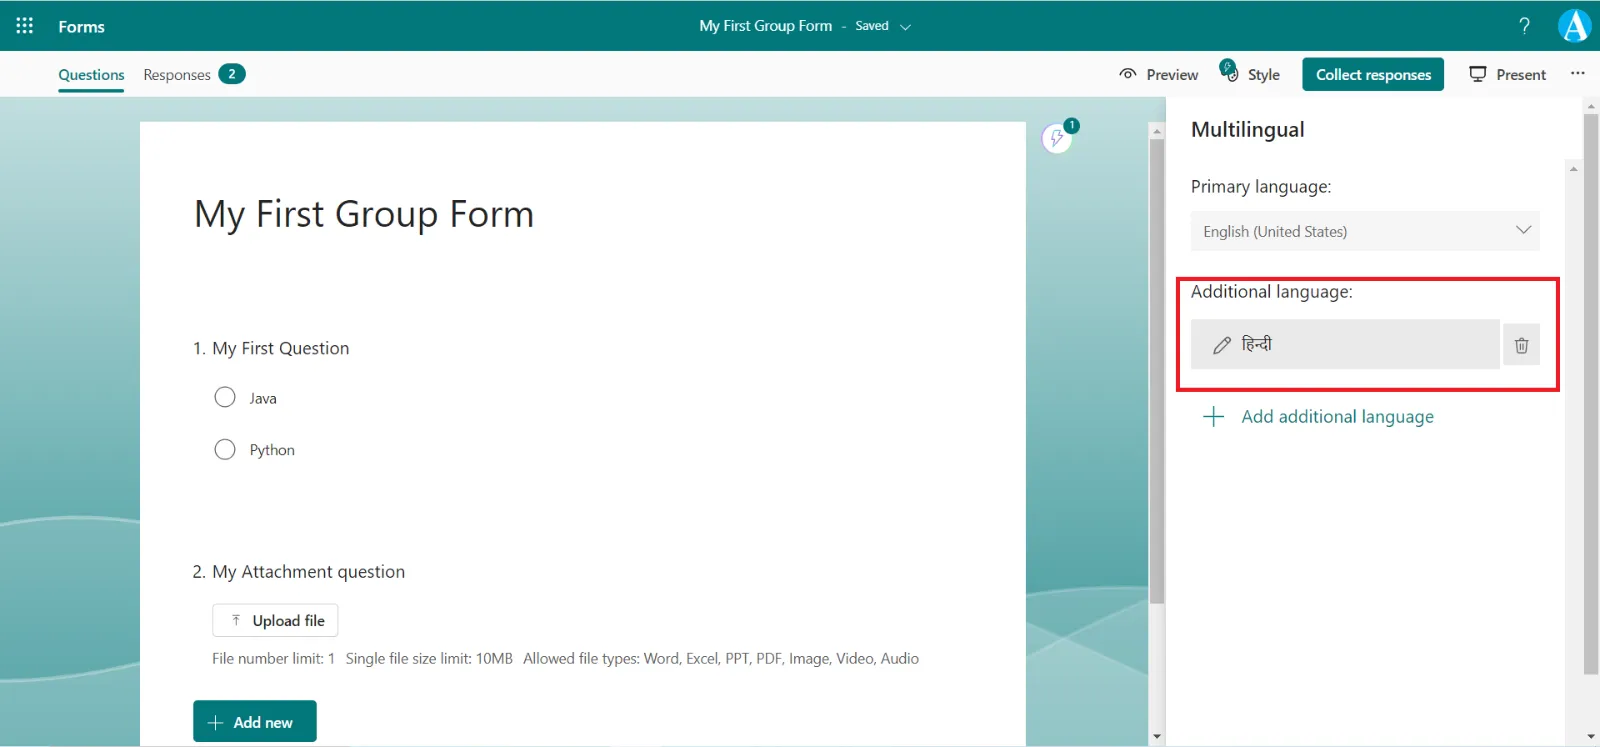 Multilingual feature in Microsoft Forms